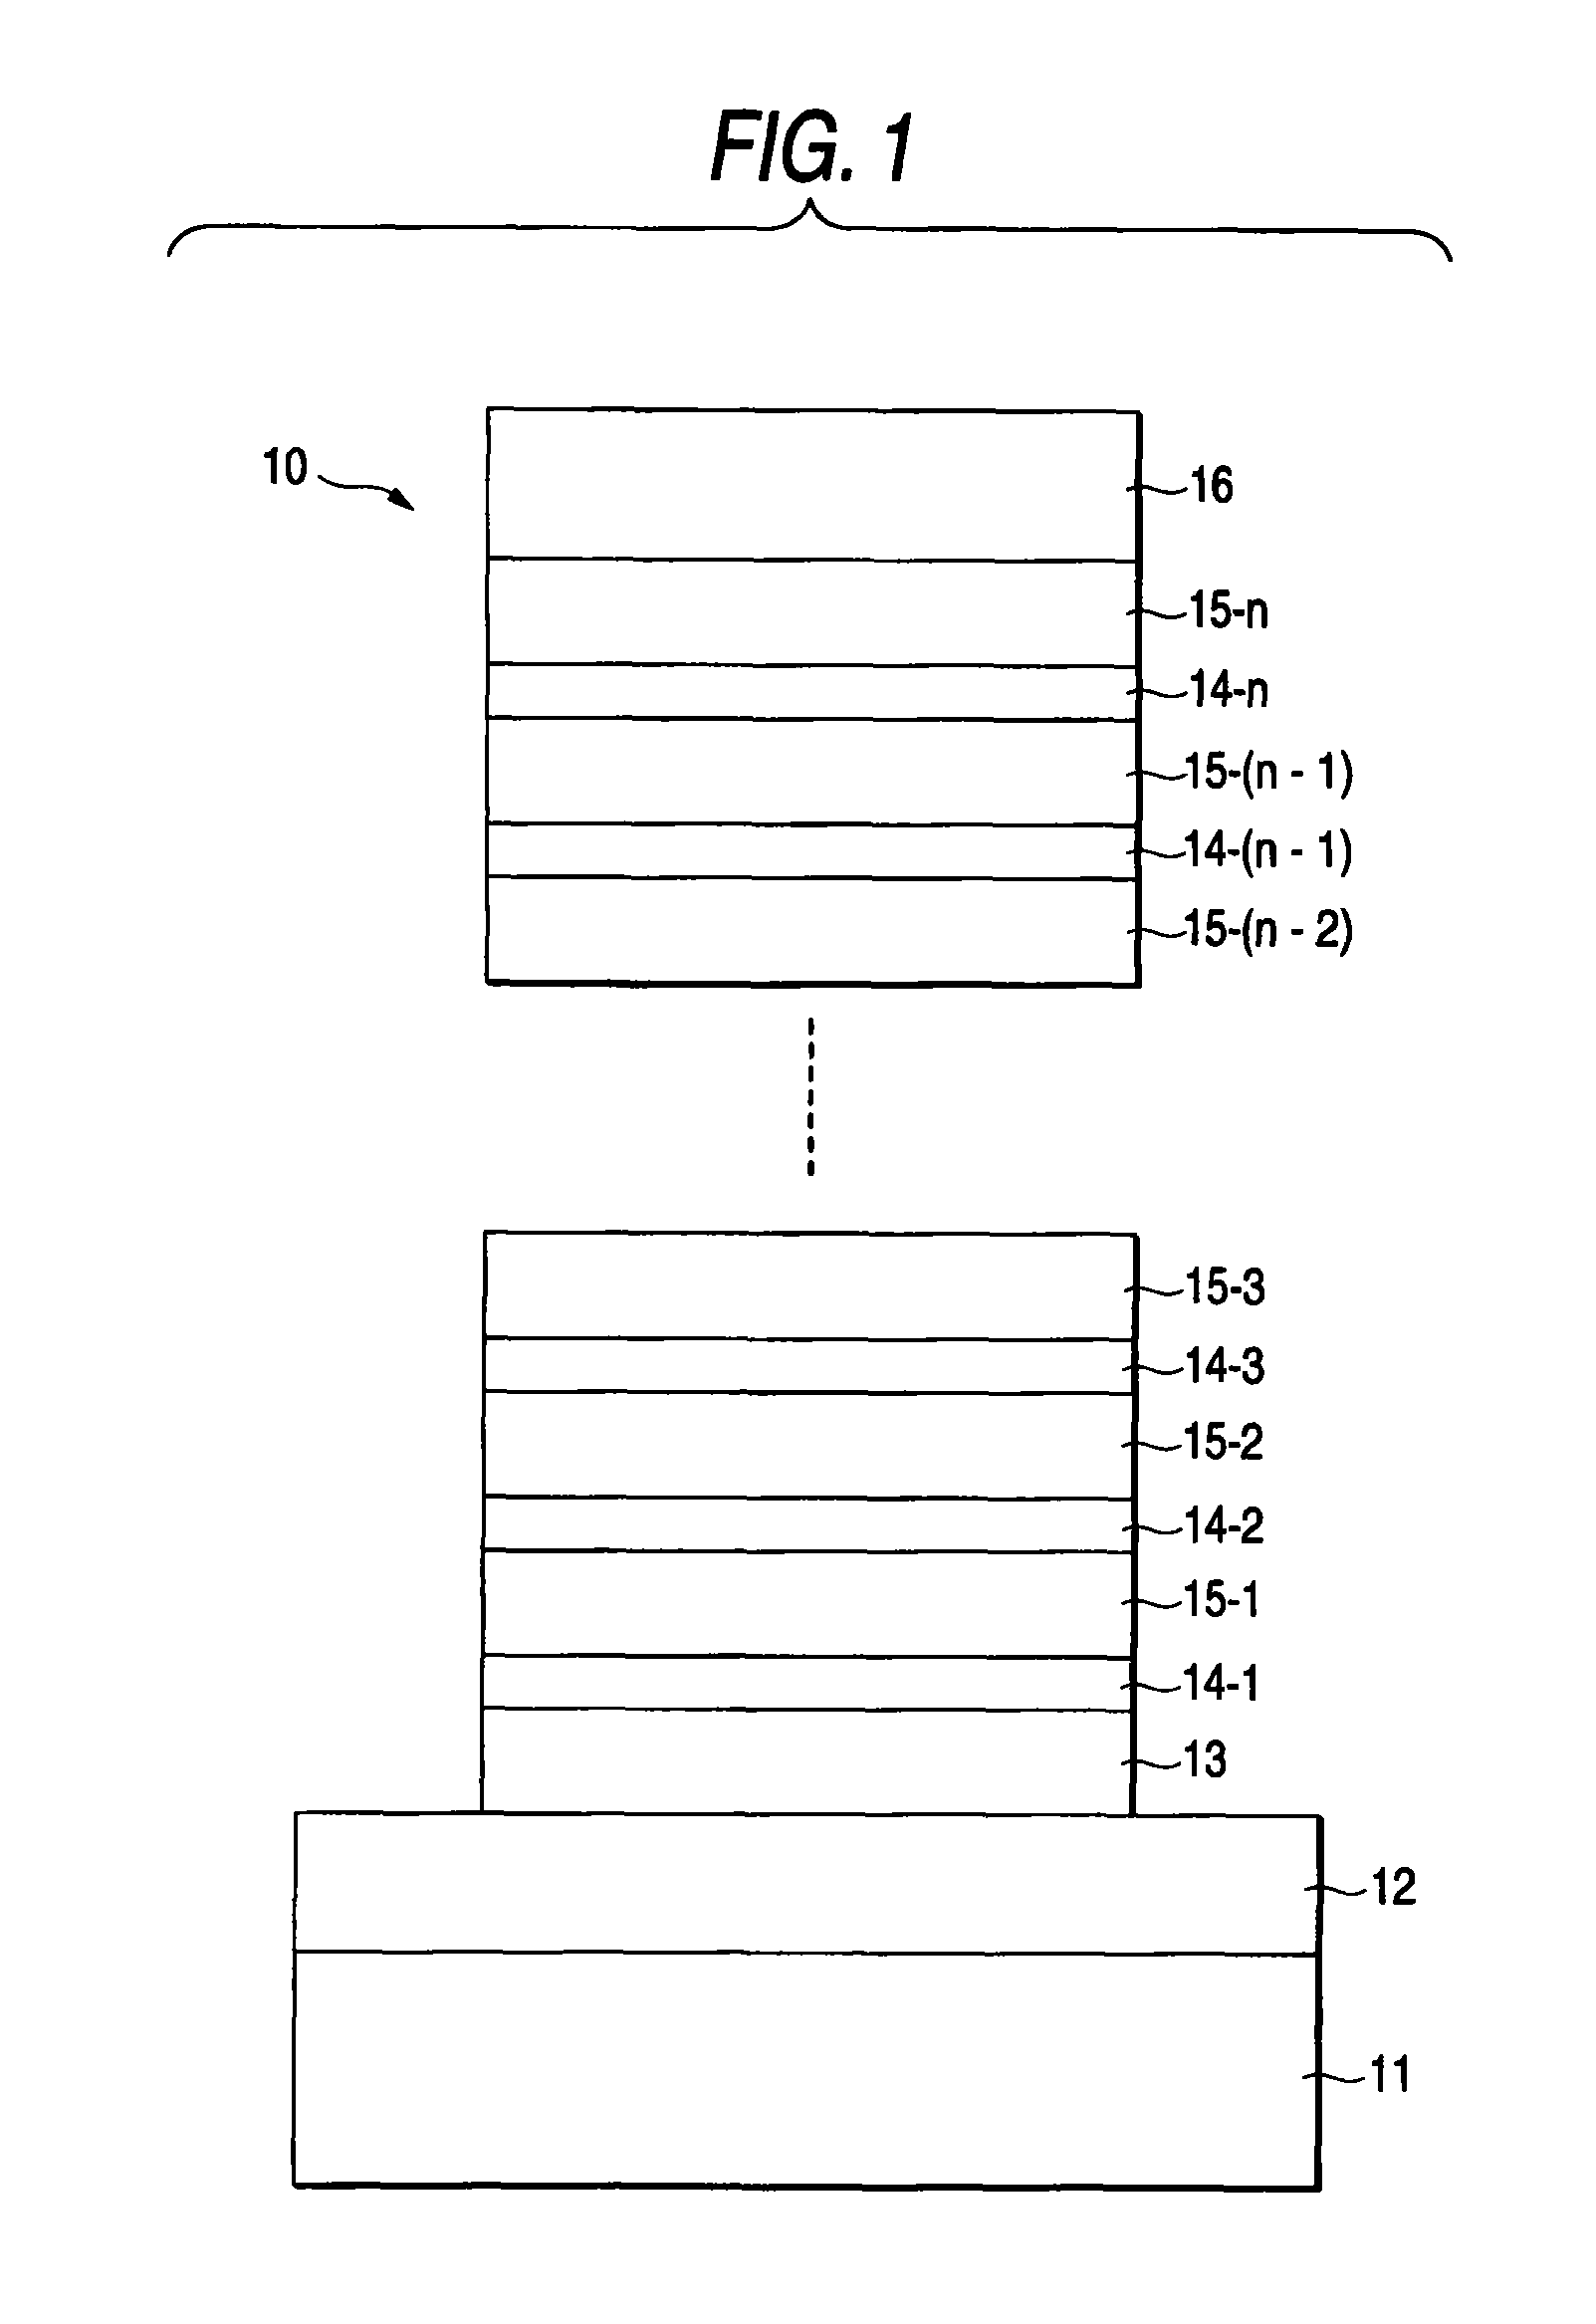 Multi-valued data recording spin injection maganetization reversal element and device using the element